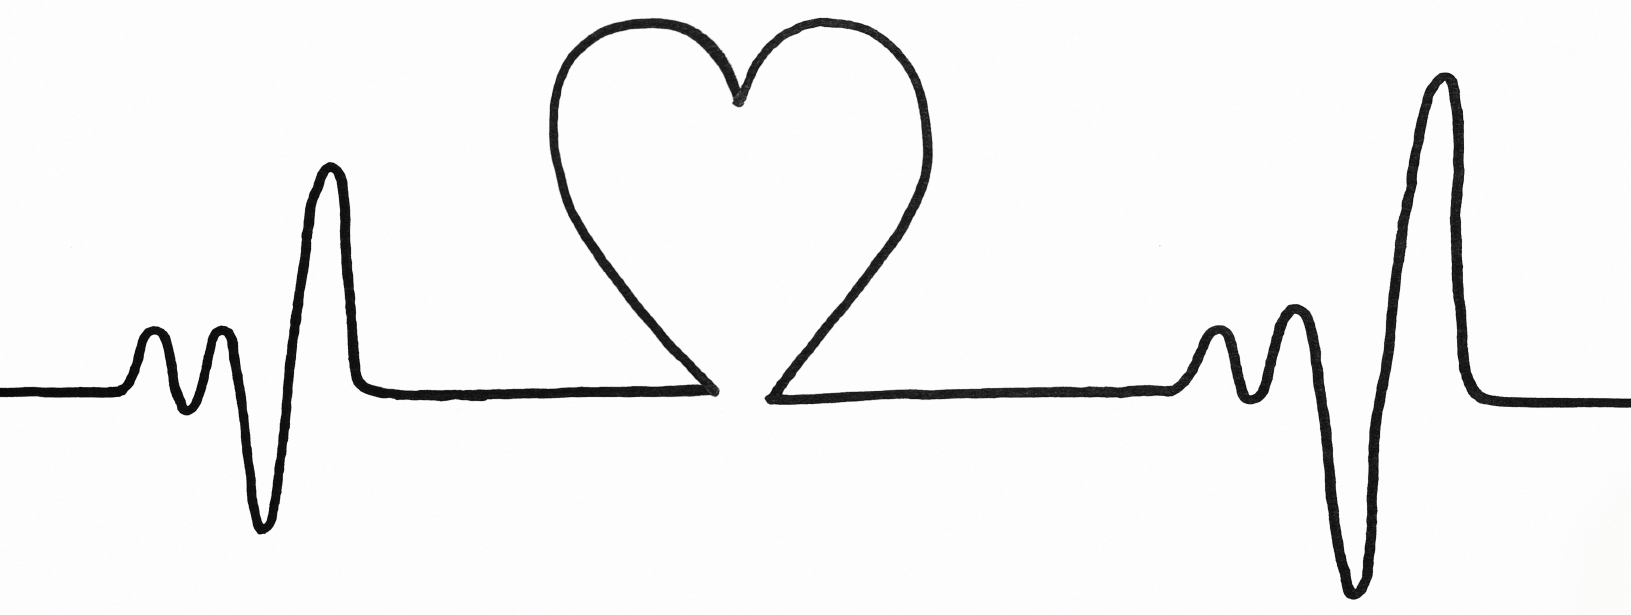 Heart rate clipart black and white 